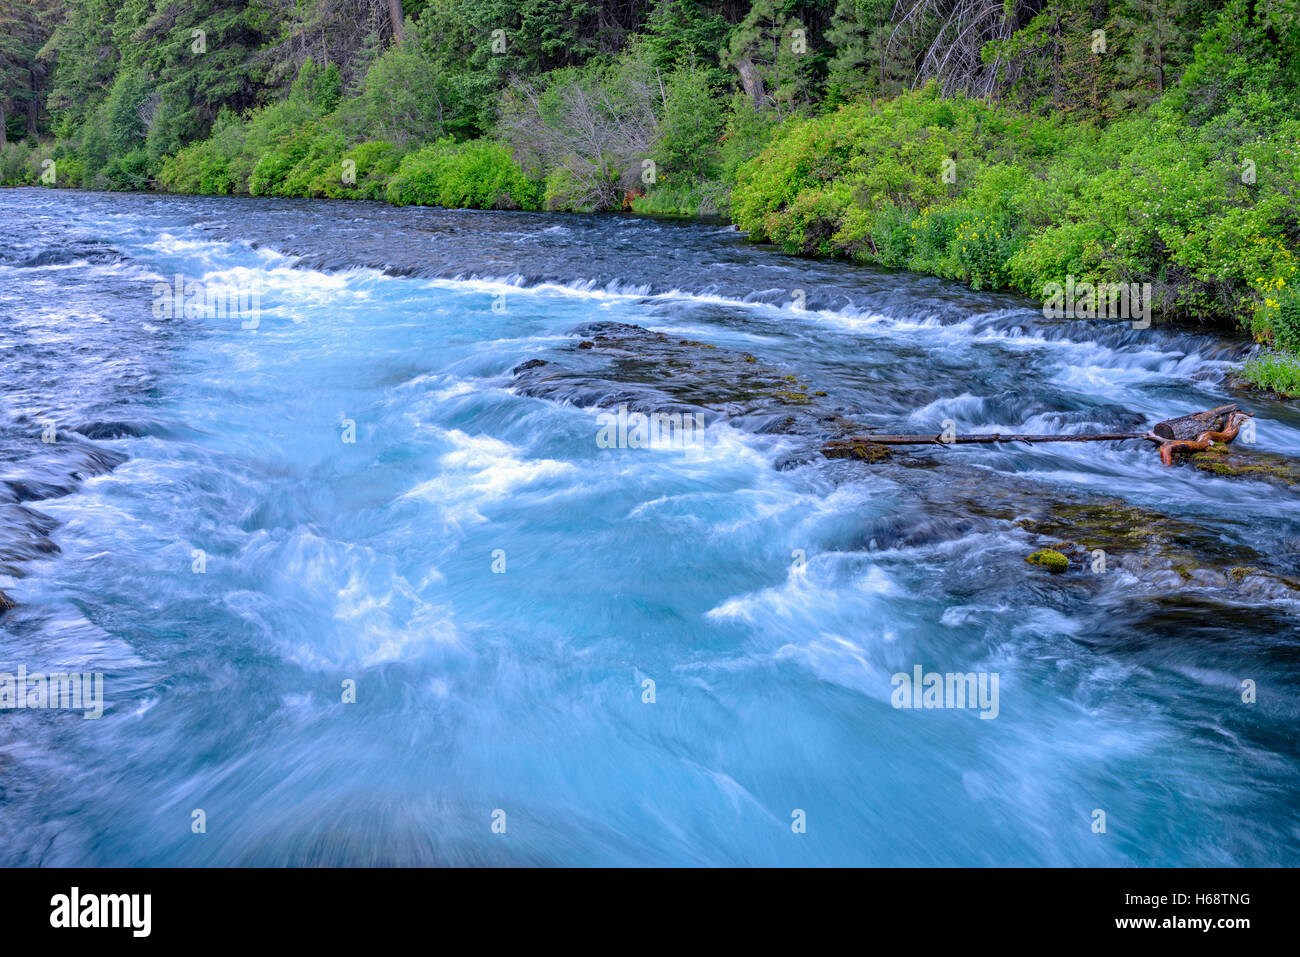 USA, Oregon, Deschutes National Forest, Wizard Falls and summer vegetation along the Metolius River - a Wild and Scenic River. Stock Photo